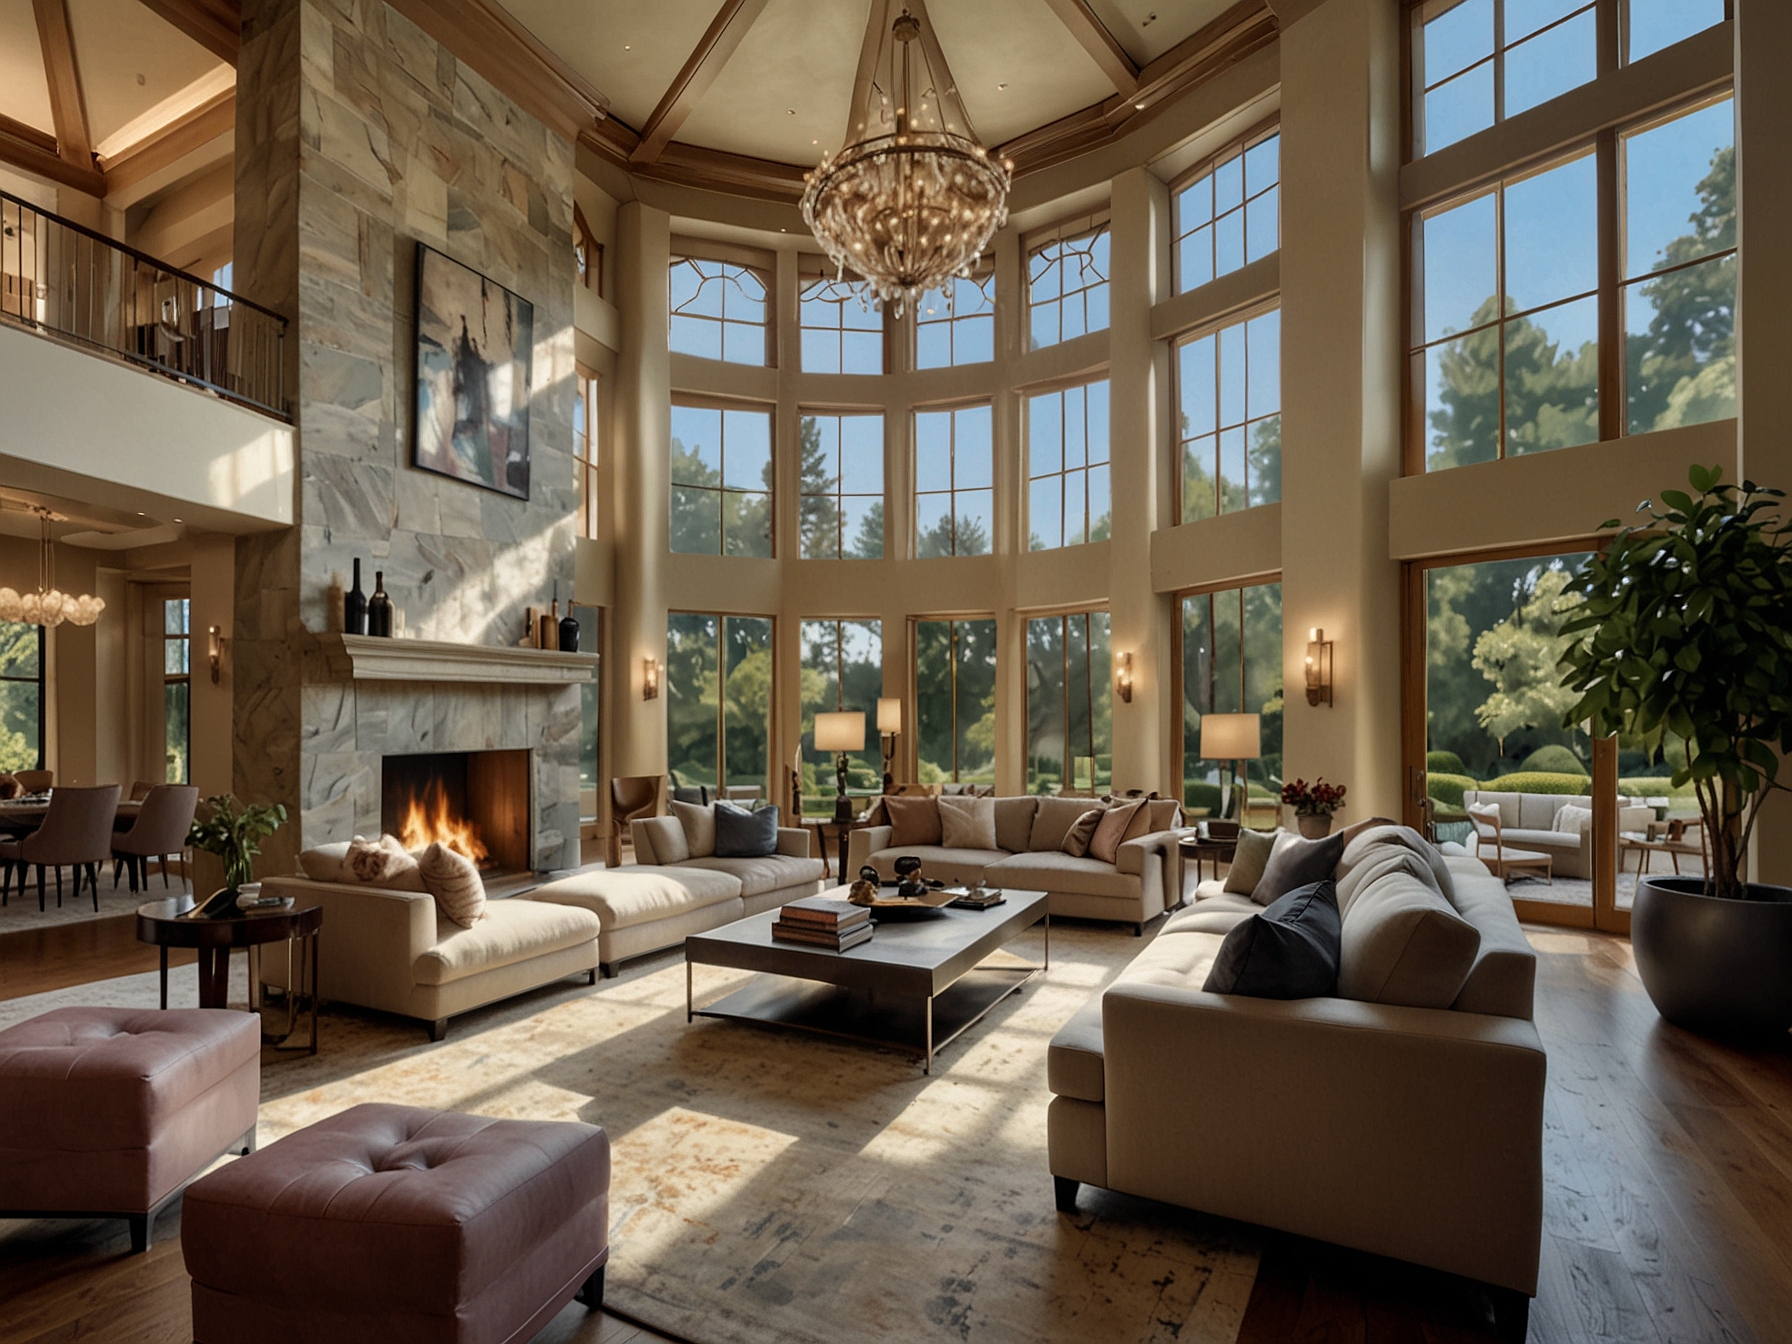 Elegant, high-ceiling living room of the Silicon Valley mansion with expansive windows, premium finishes, and opulent decor, illustrating the lavish interior of the property recently sold by Eric Schmidt.